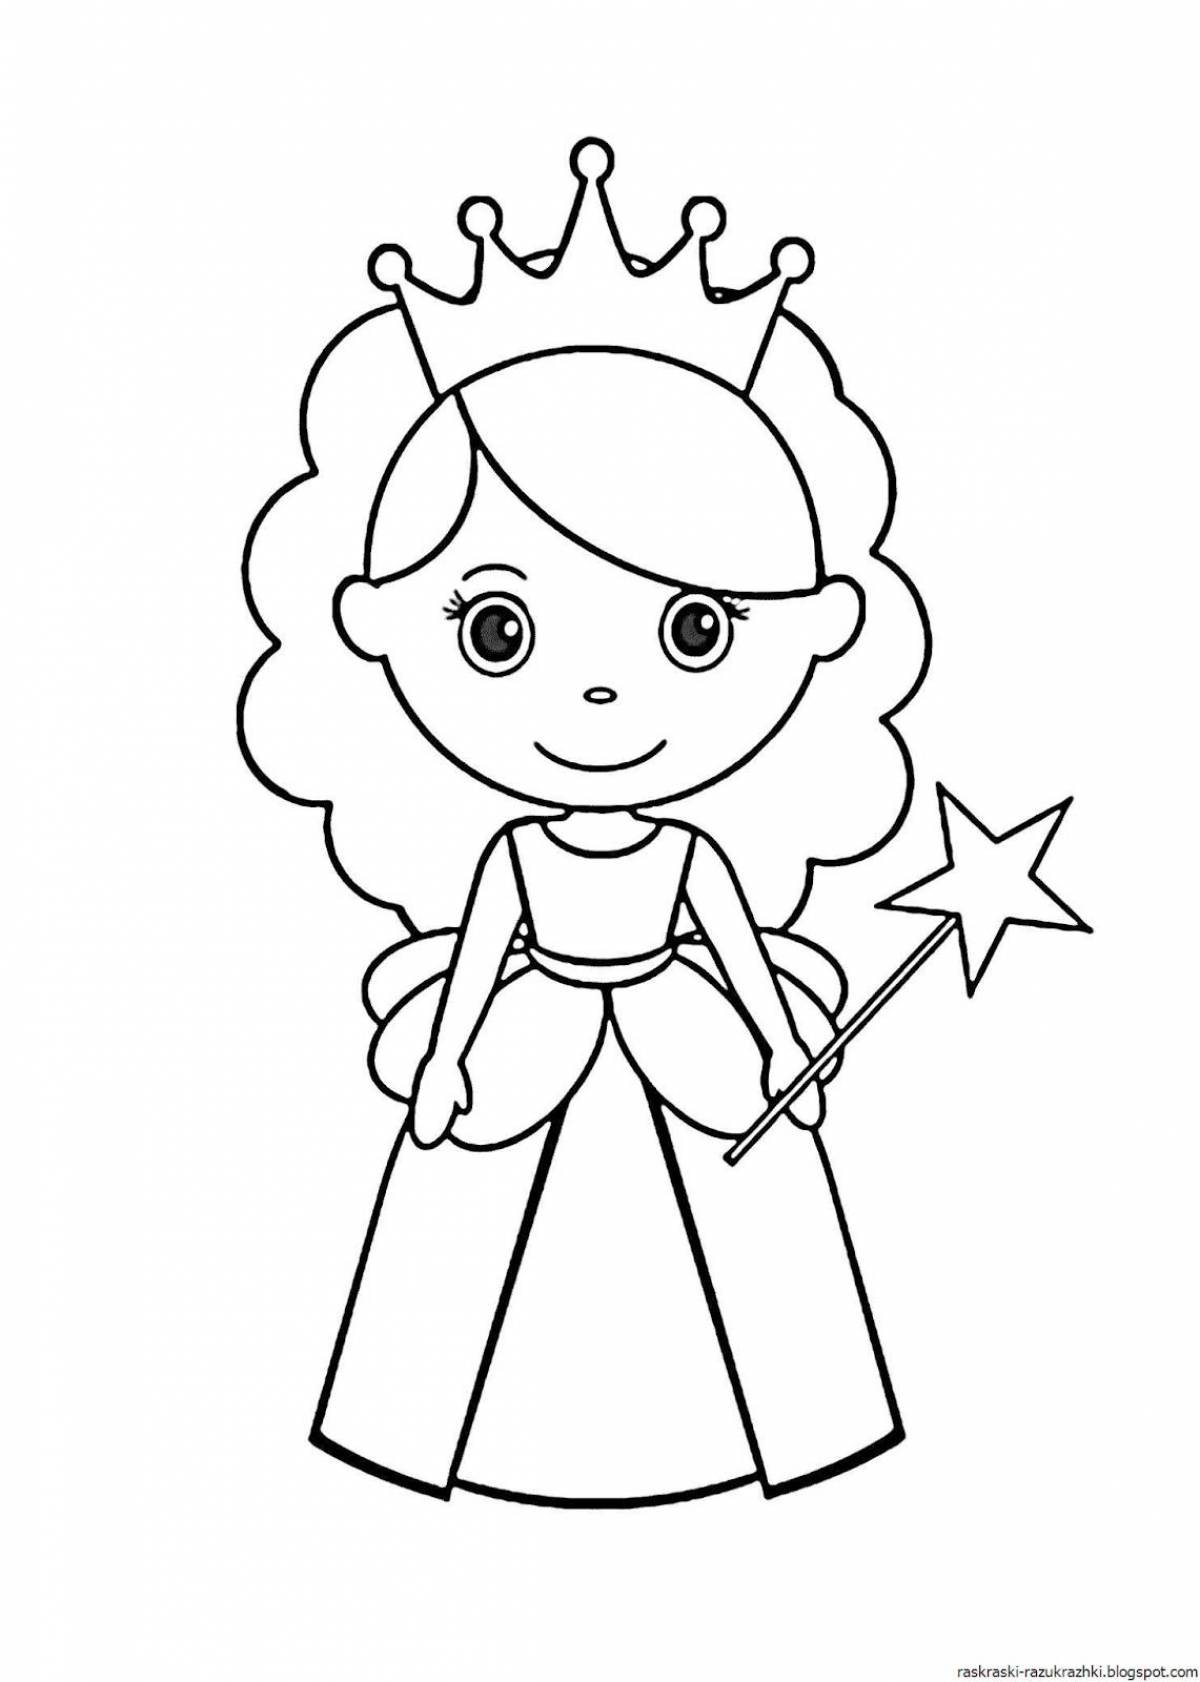 Cute princess coloring pages for kids